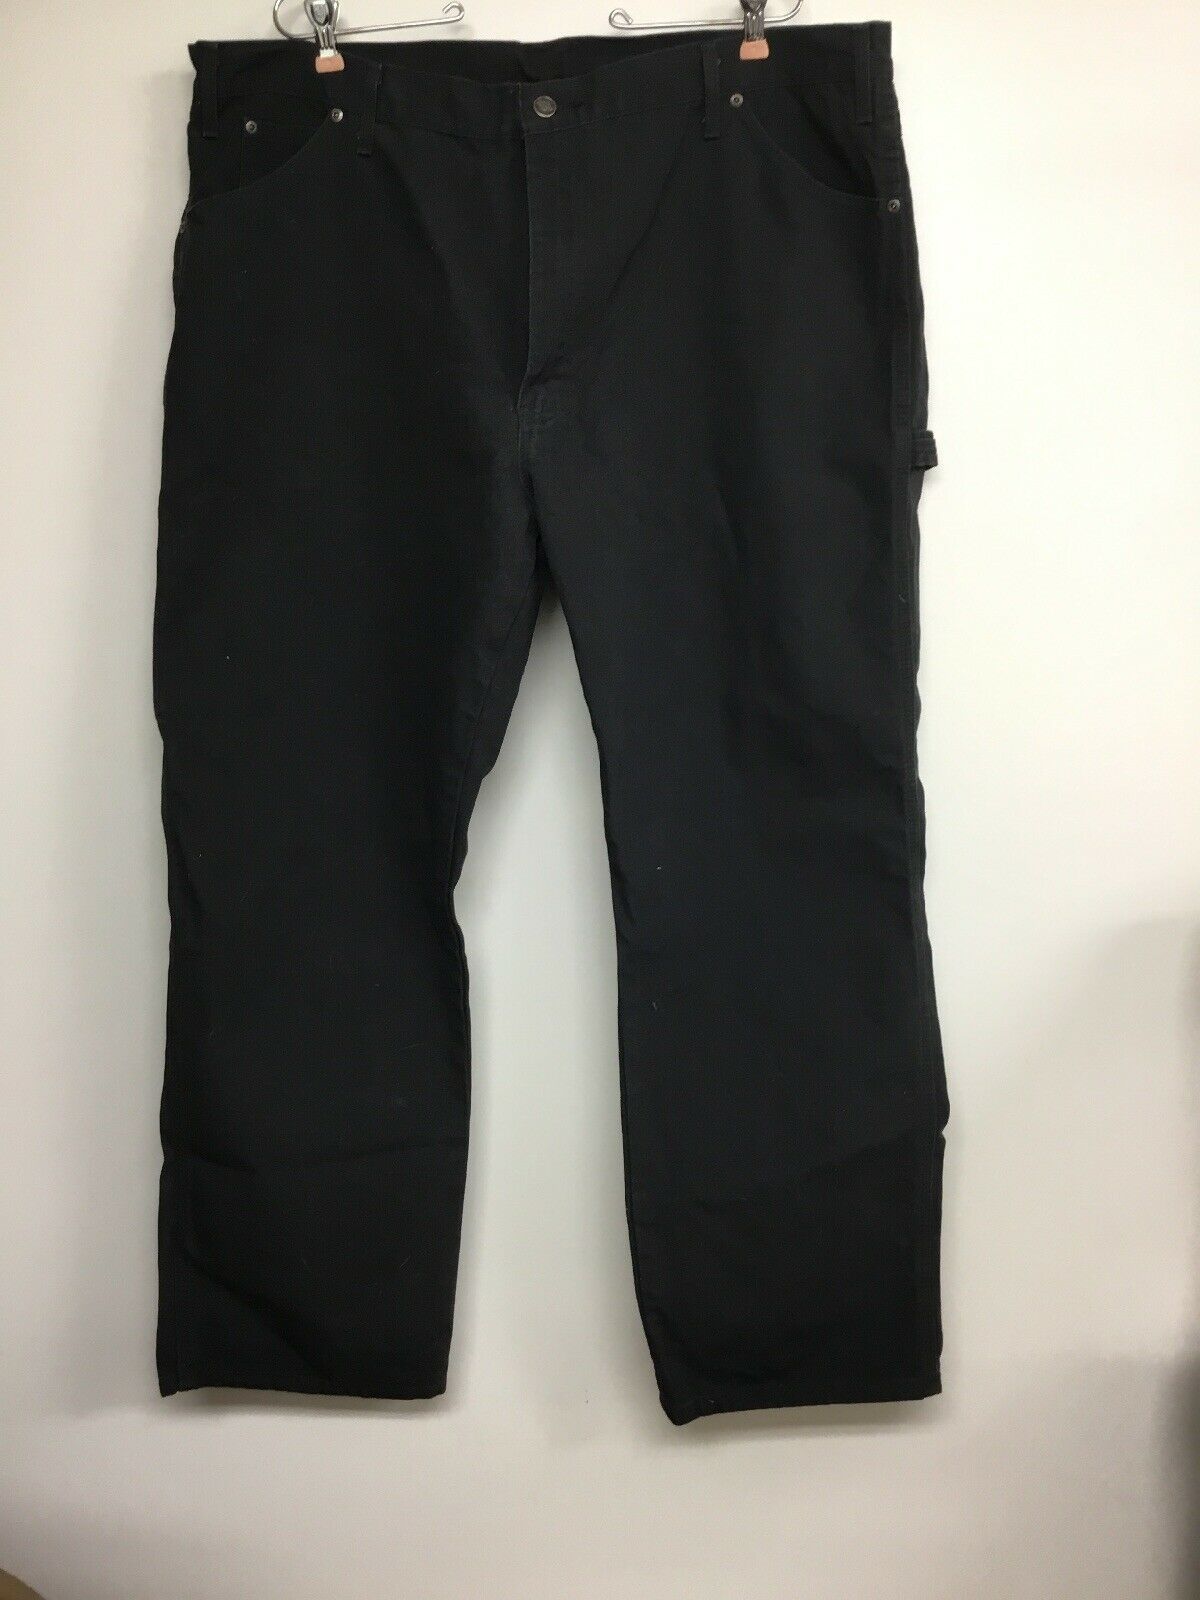 Dickies Duck Canvas 42x30 Black Relaxed Carpenter Work Pants - Pants